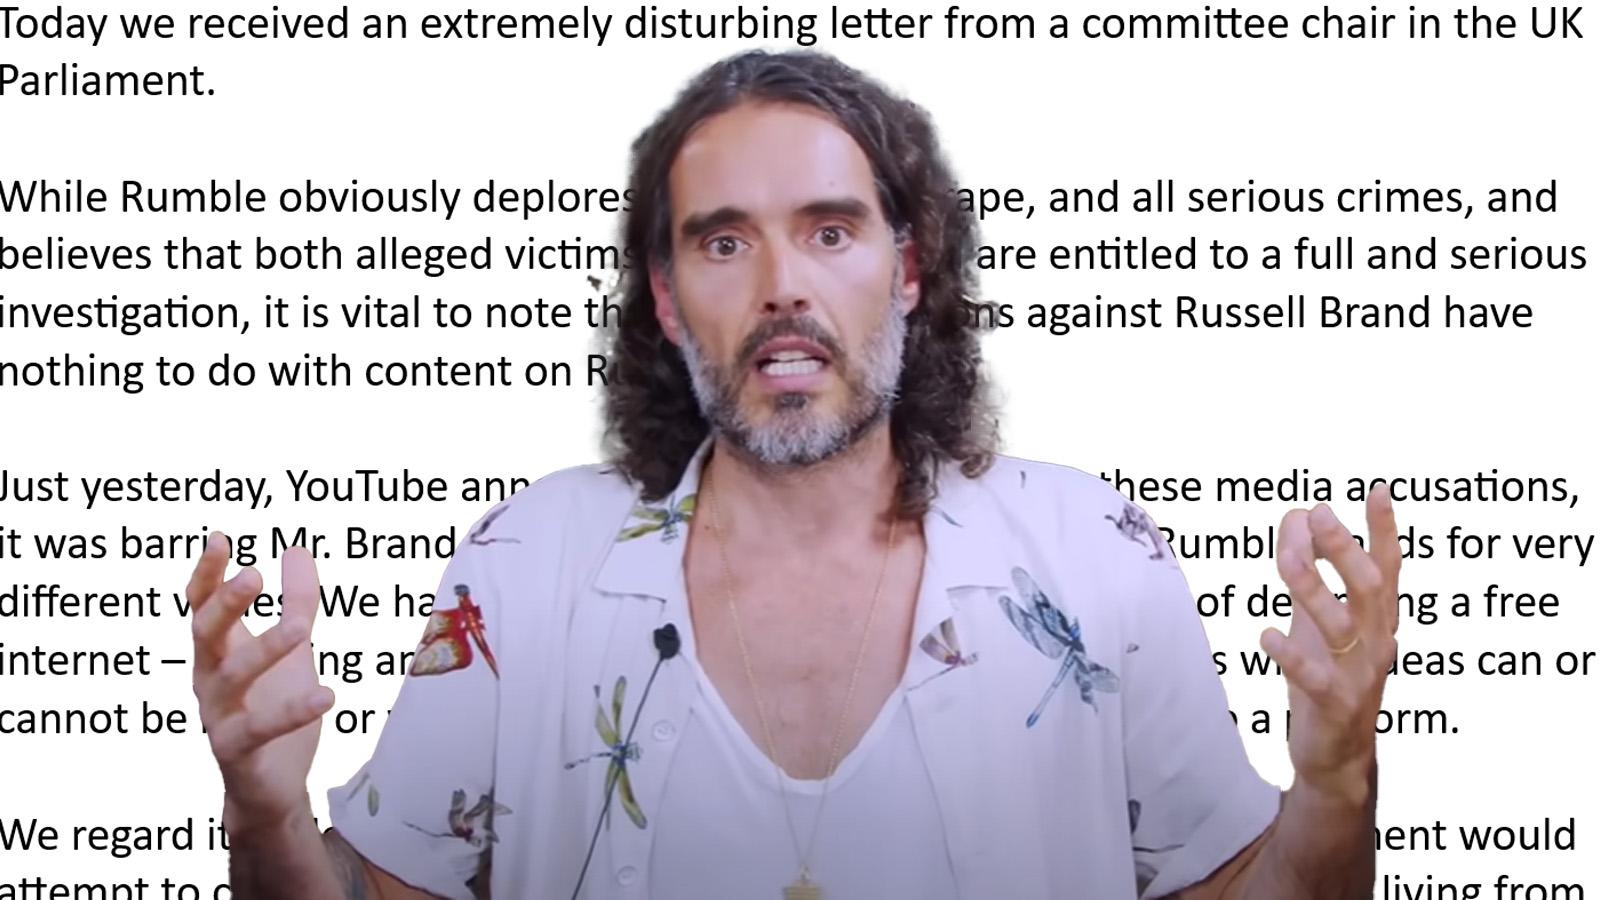 Rumble CEO dismisses calls to demonetize Russel Brand following allegations